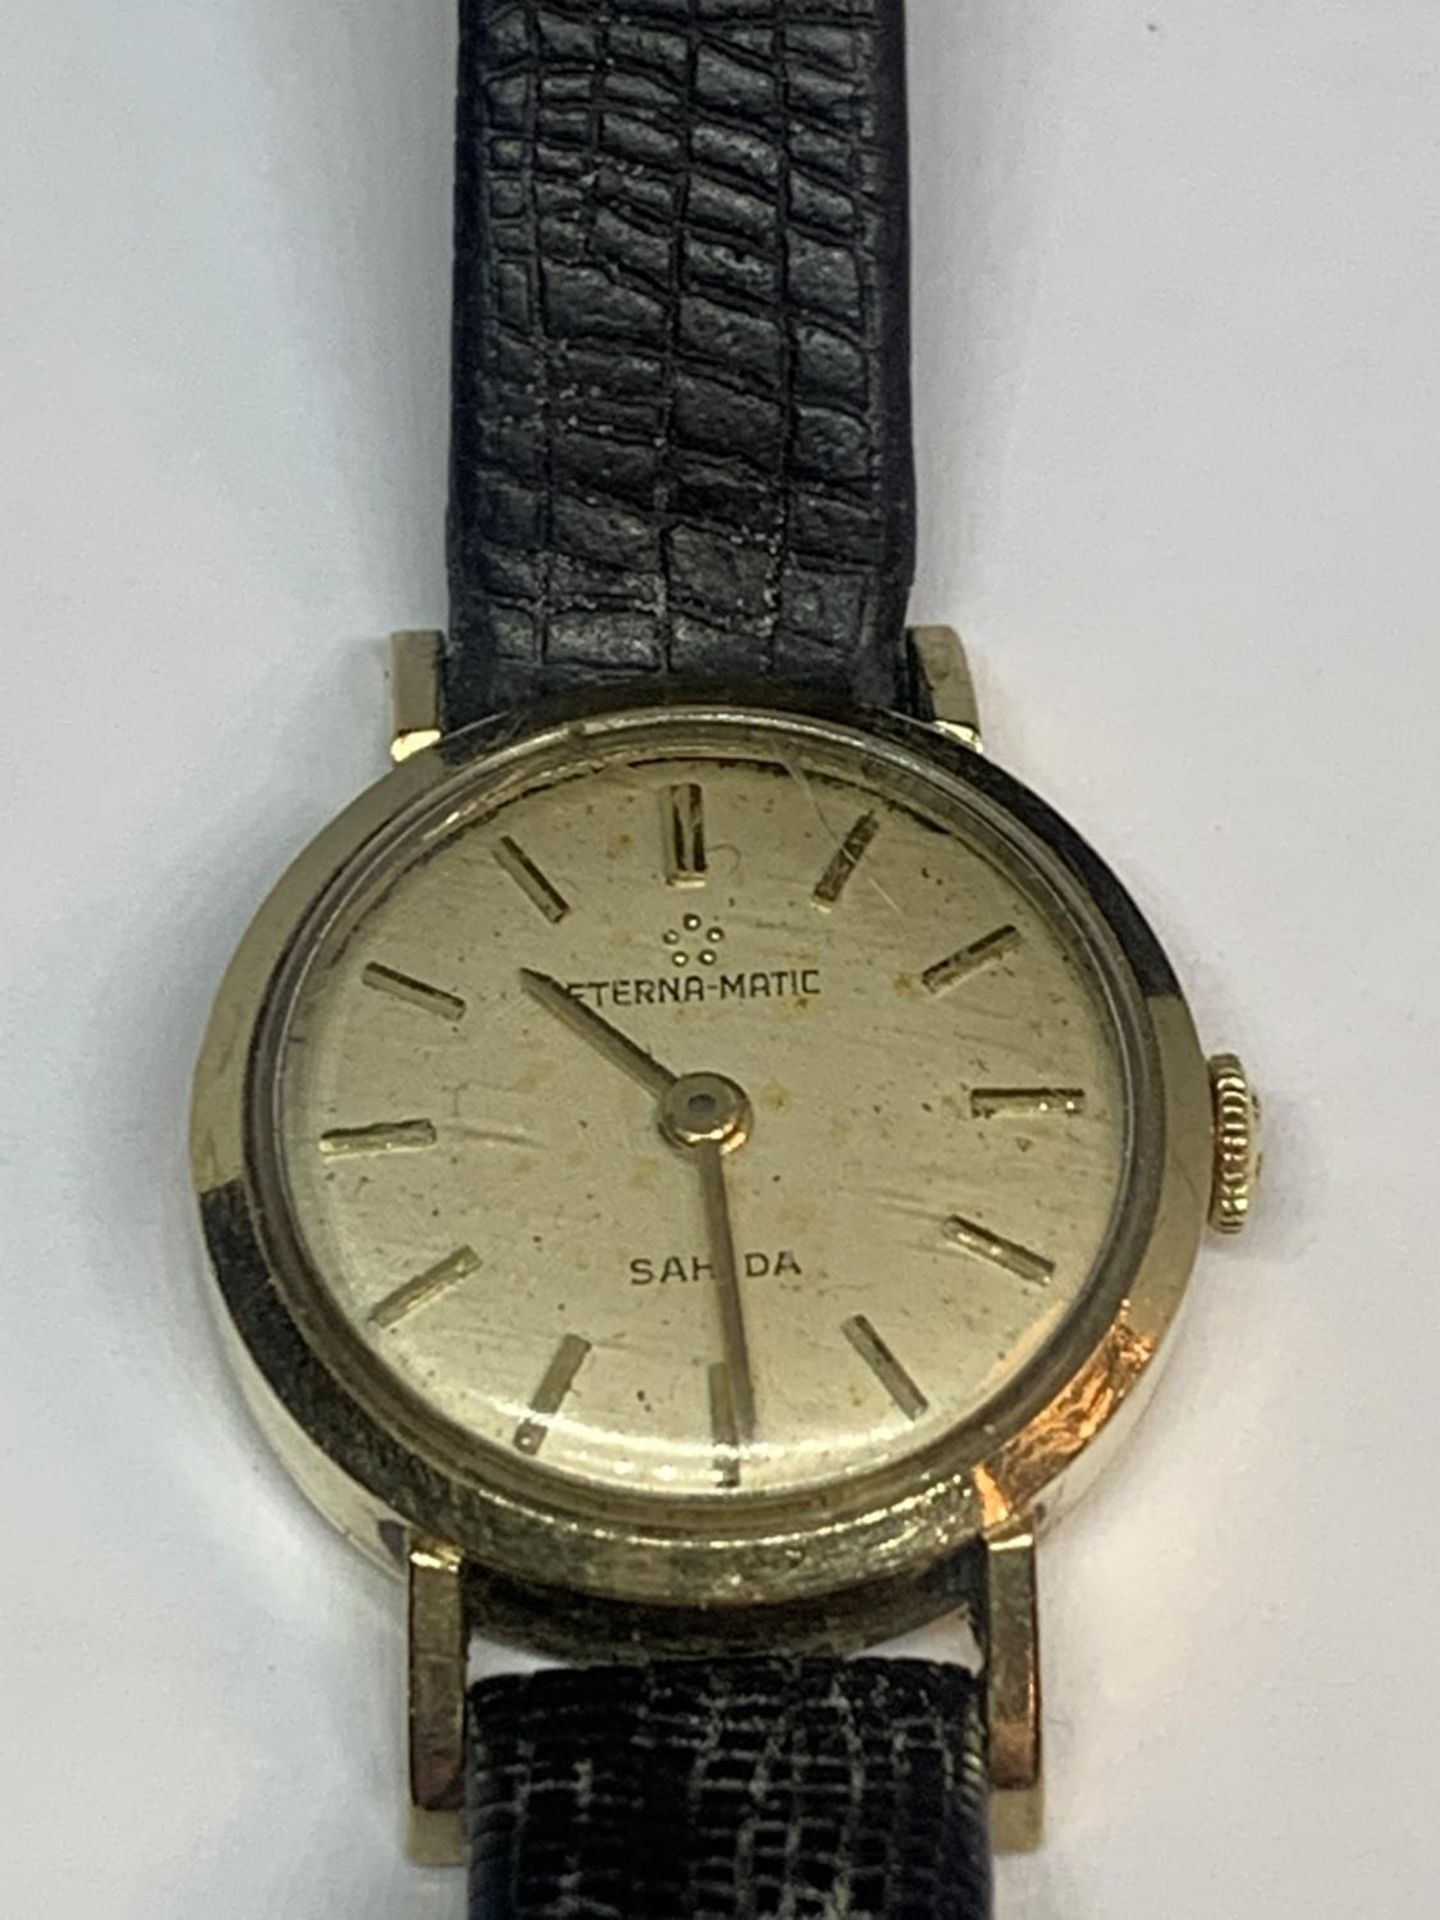 A 9 CARAT GOLD CASED ETERNA-MATIC WRIST WATCH WITH LEATHER STRAP - Image 2 of 4